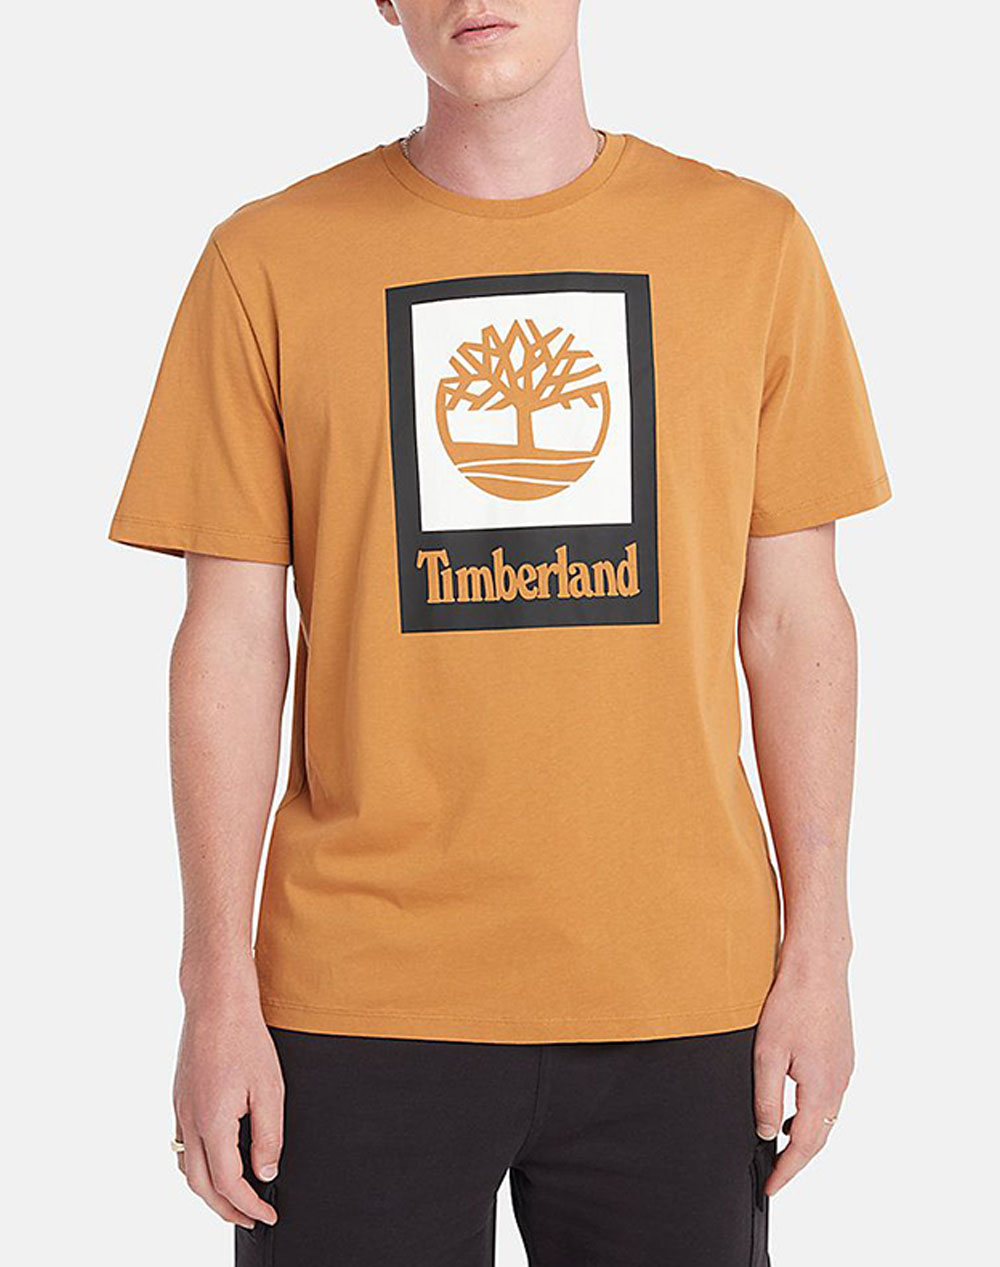 TIMBERLAND STLG Colored Short Sleeve Te TB0A5QS2-P47 Orange